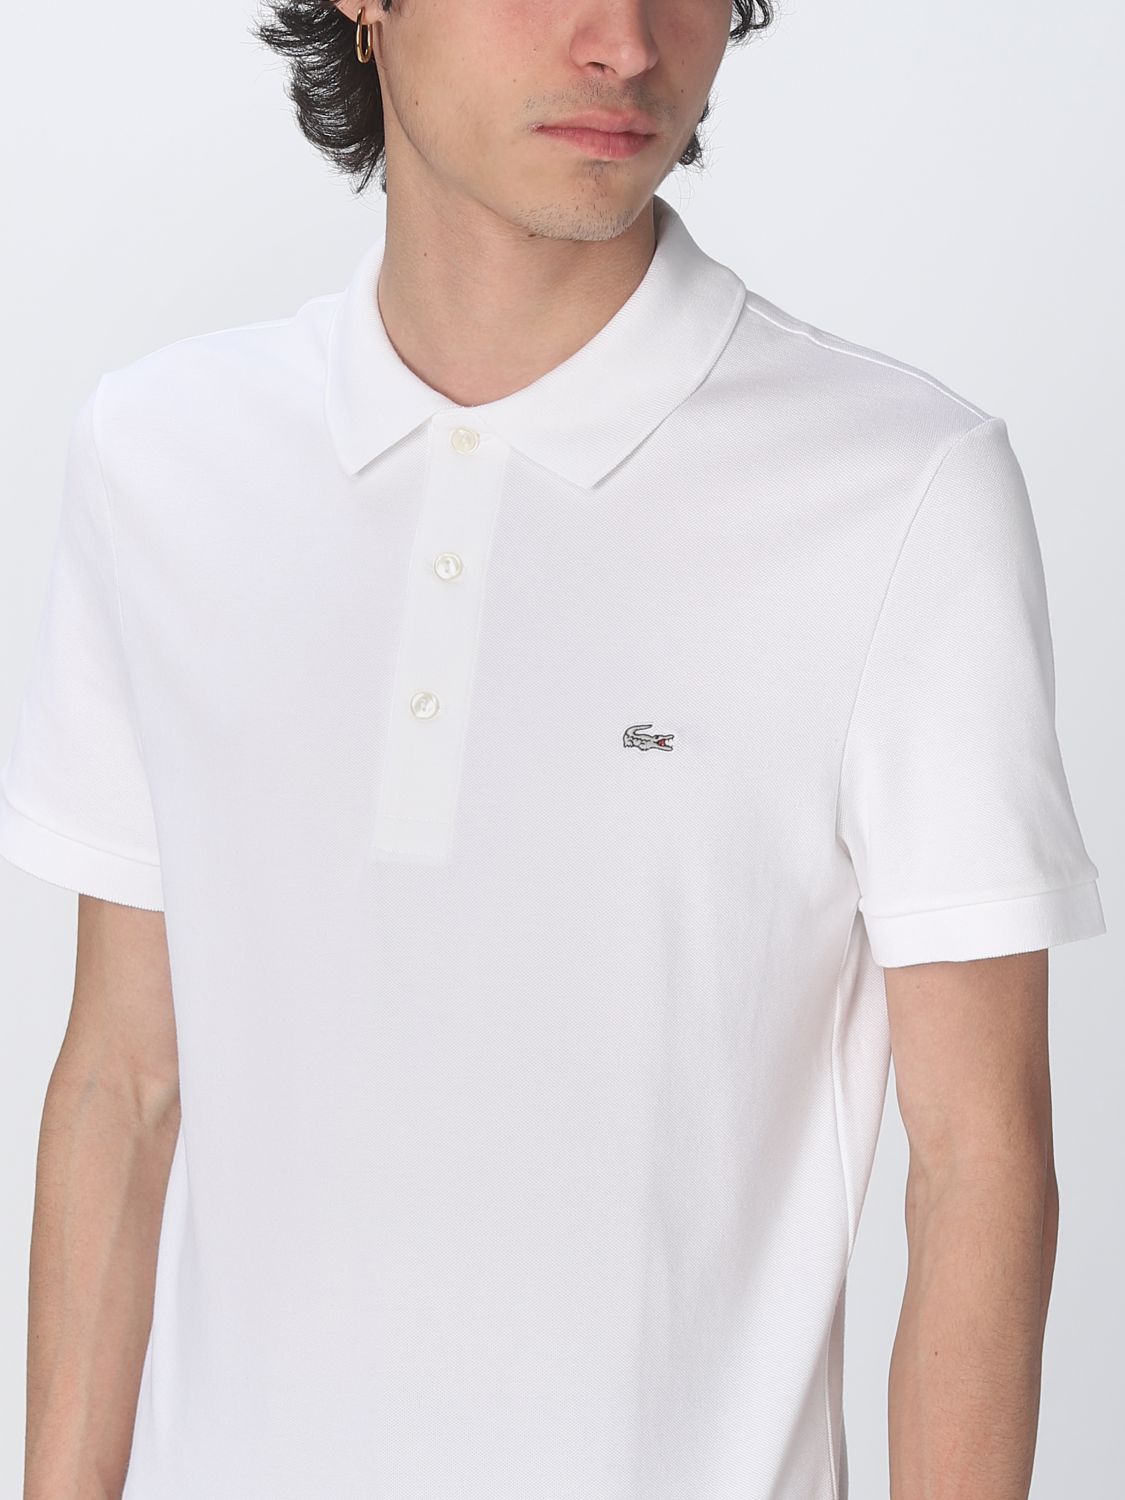 LACOSTE: shirt for man - White | Lacoste polo PH4014 online on